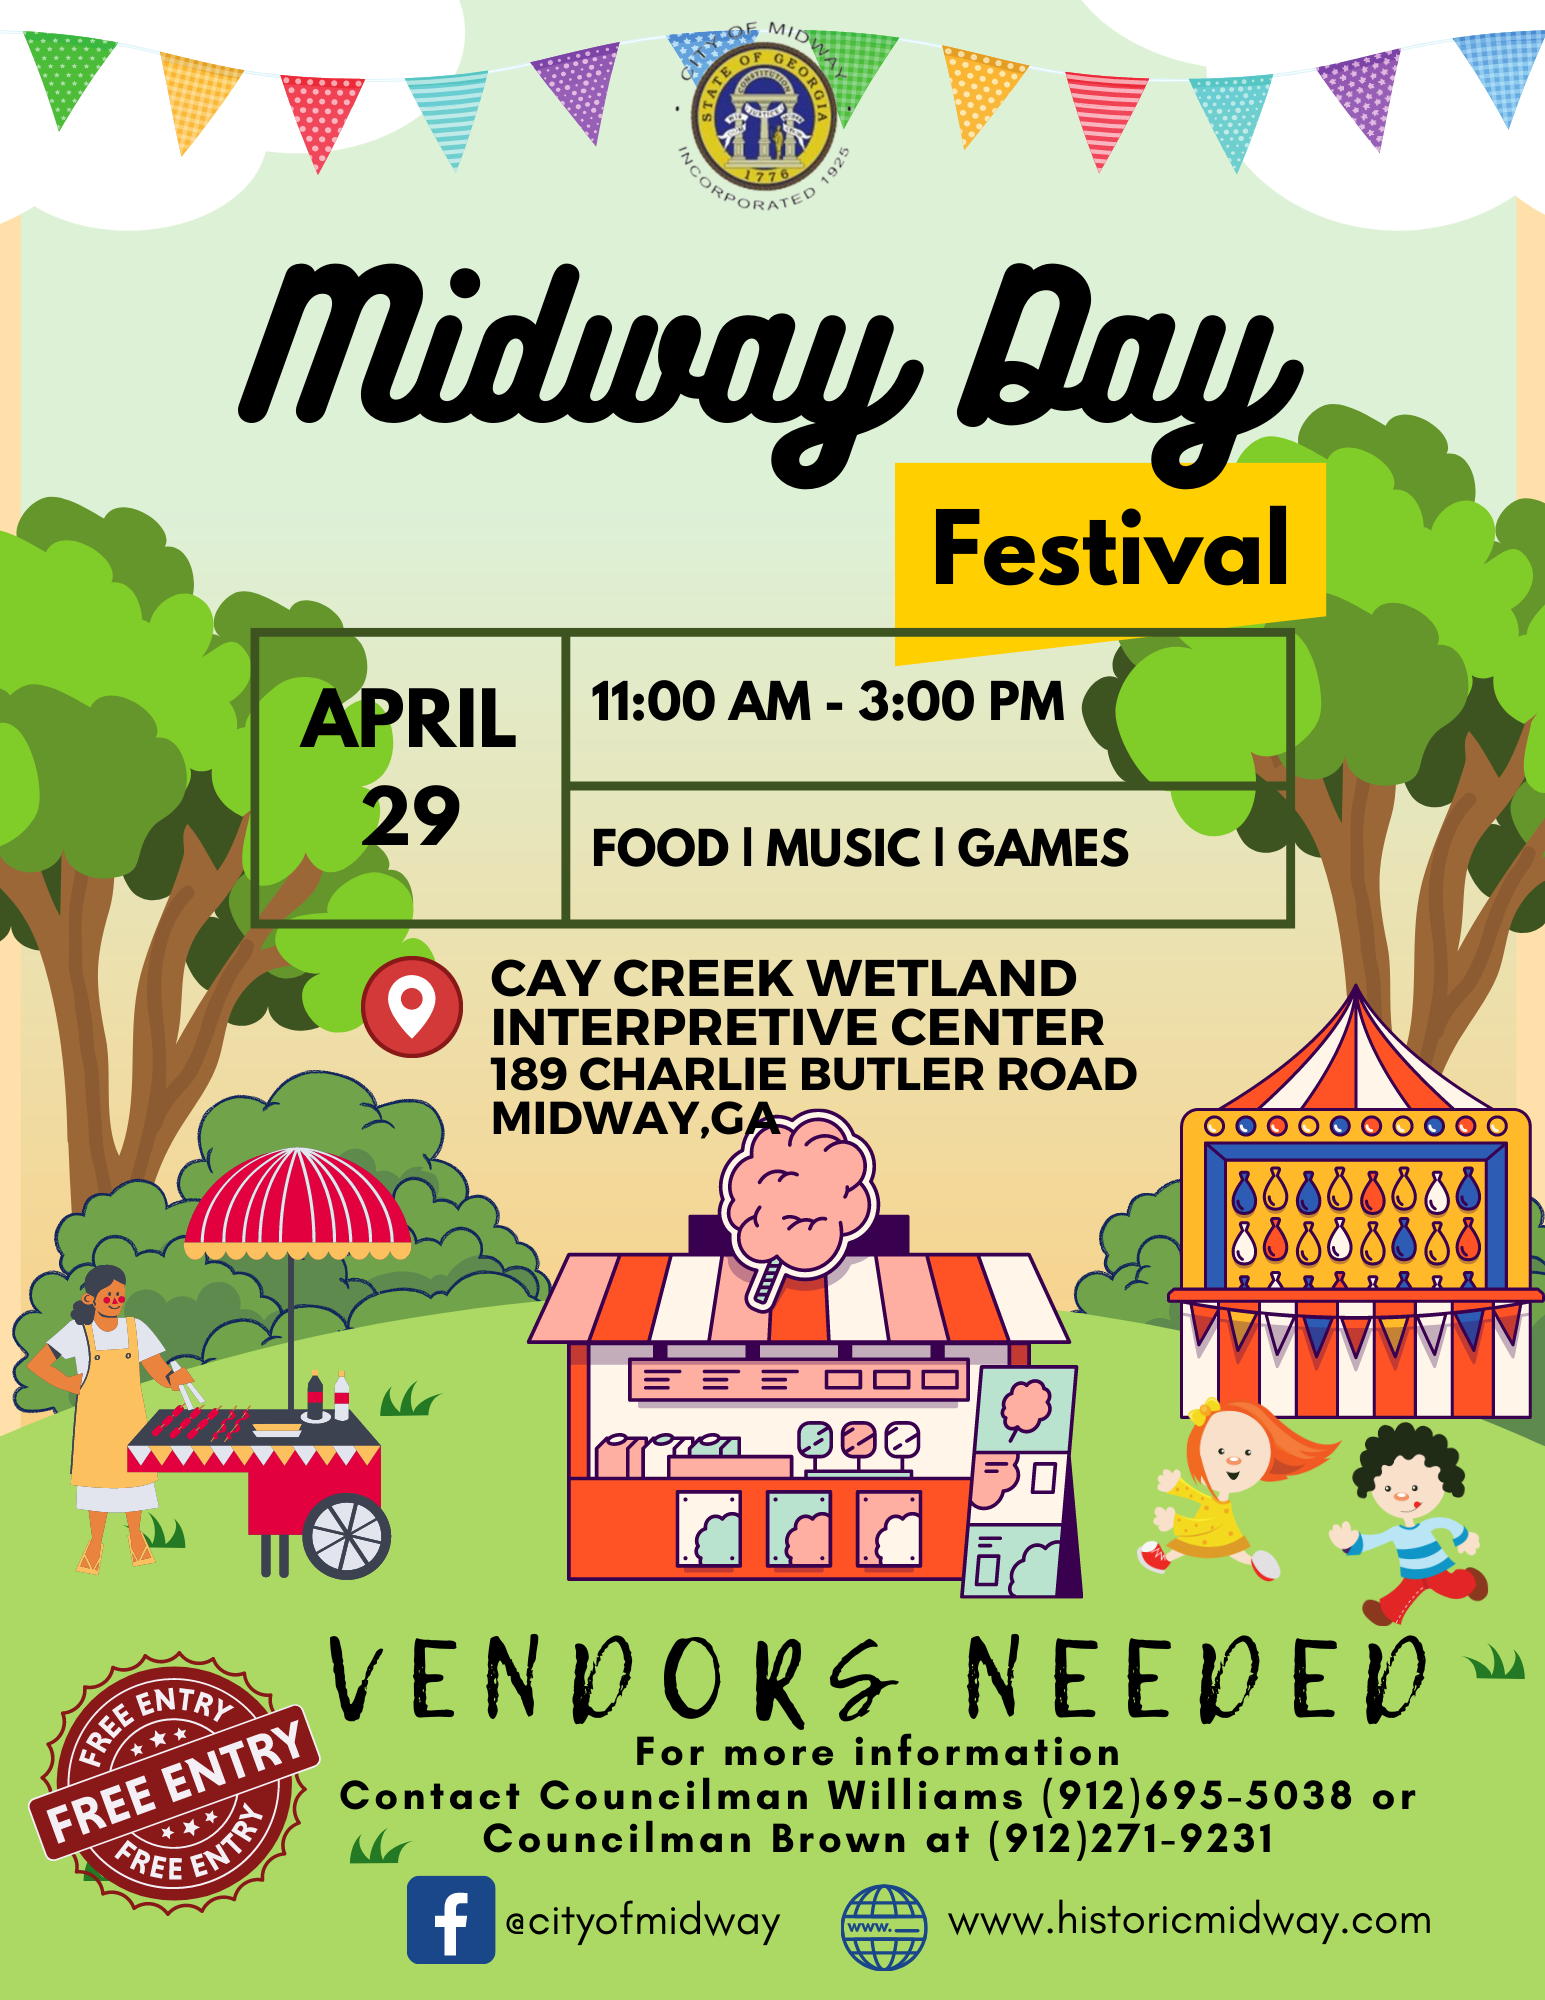 Midway Day Festival